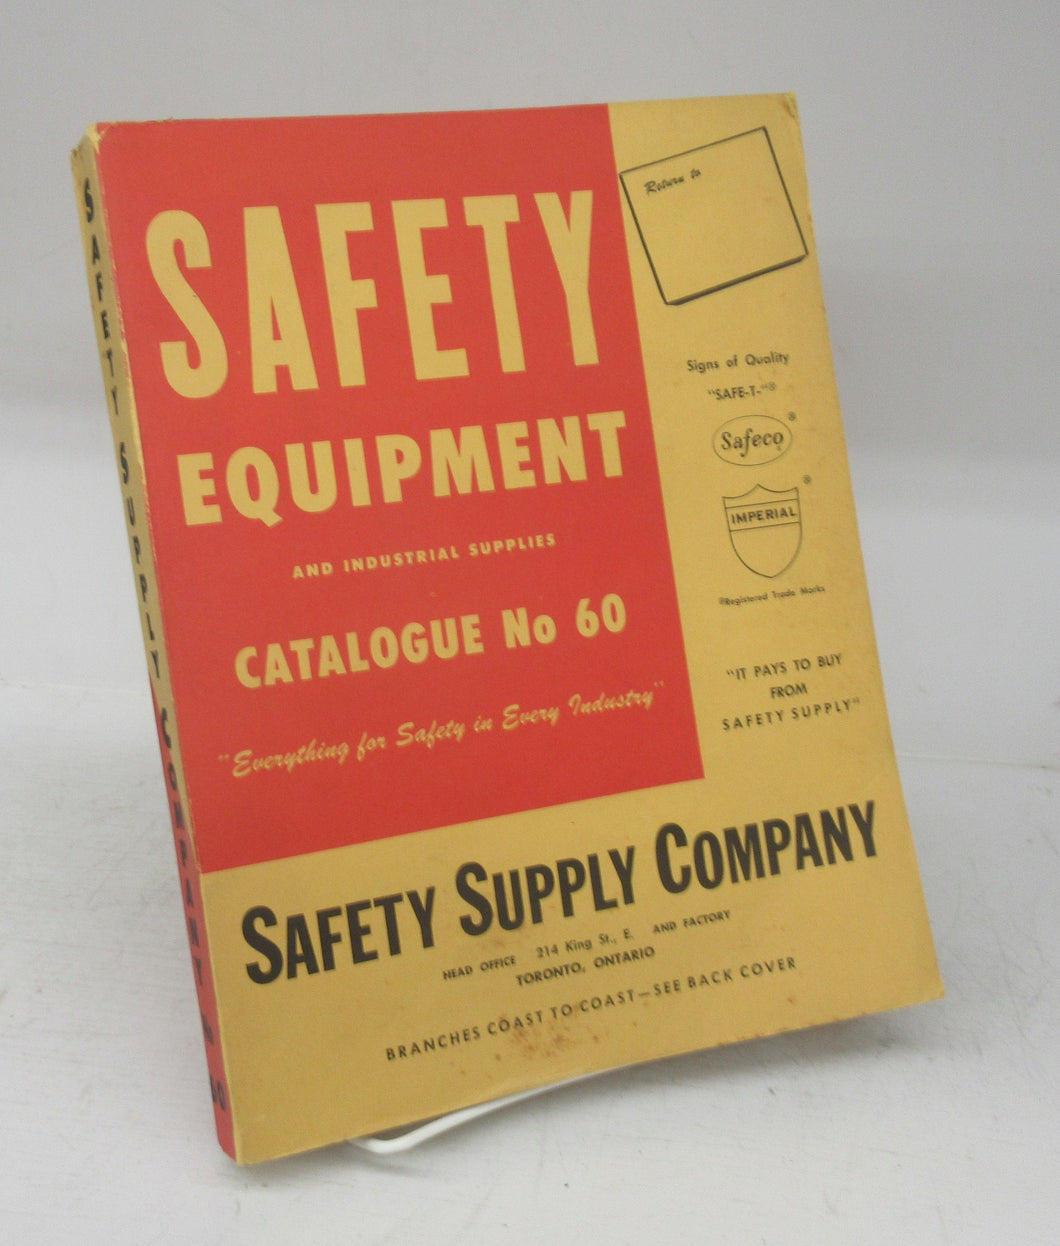 Safety Equipment and Industrial Supplies Catalogue No. 60